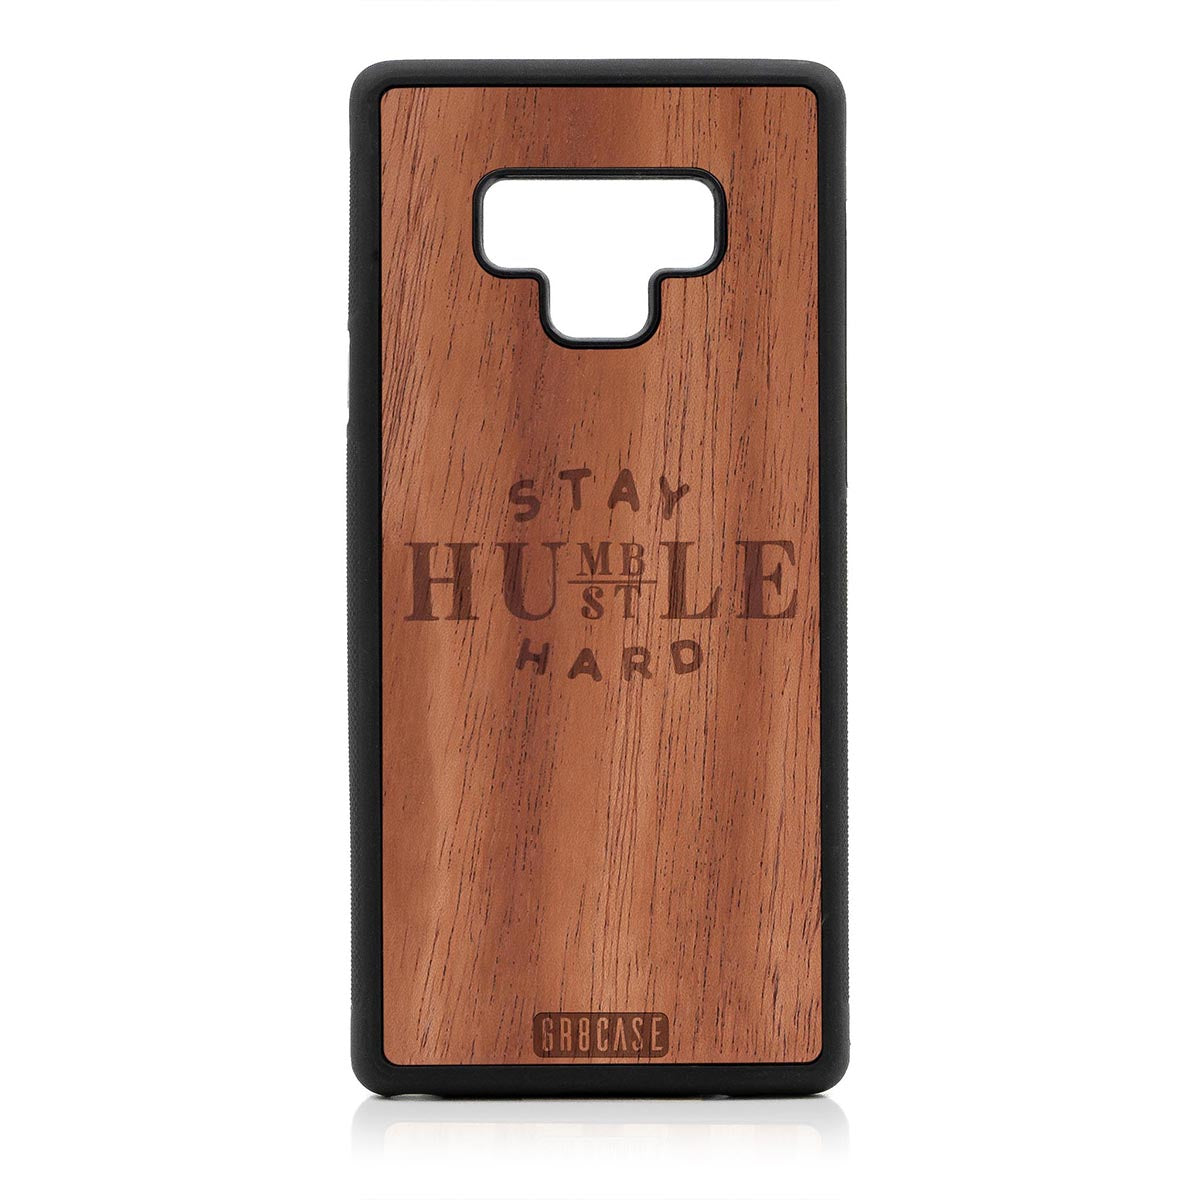 Stay Humble Hustle Hard Design Wood Case Samsung Galaxy Note 9 by GR8CASE